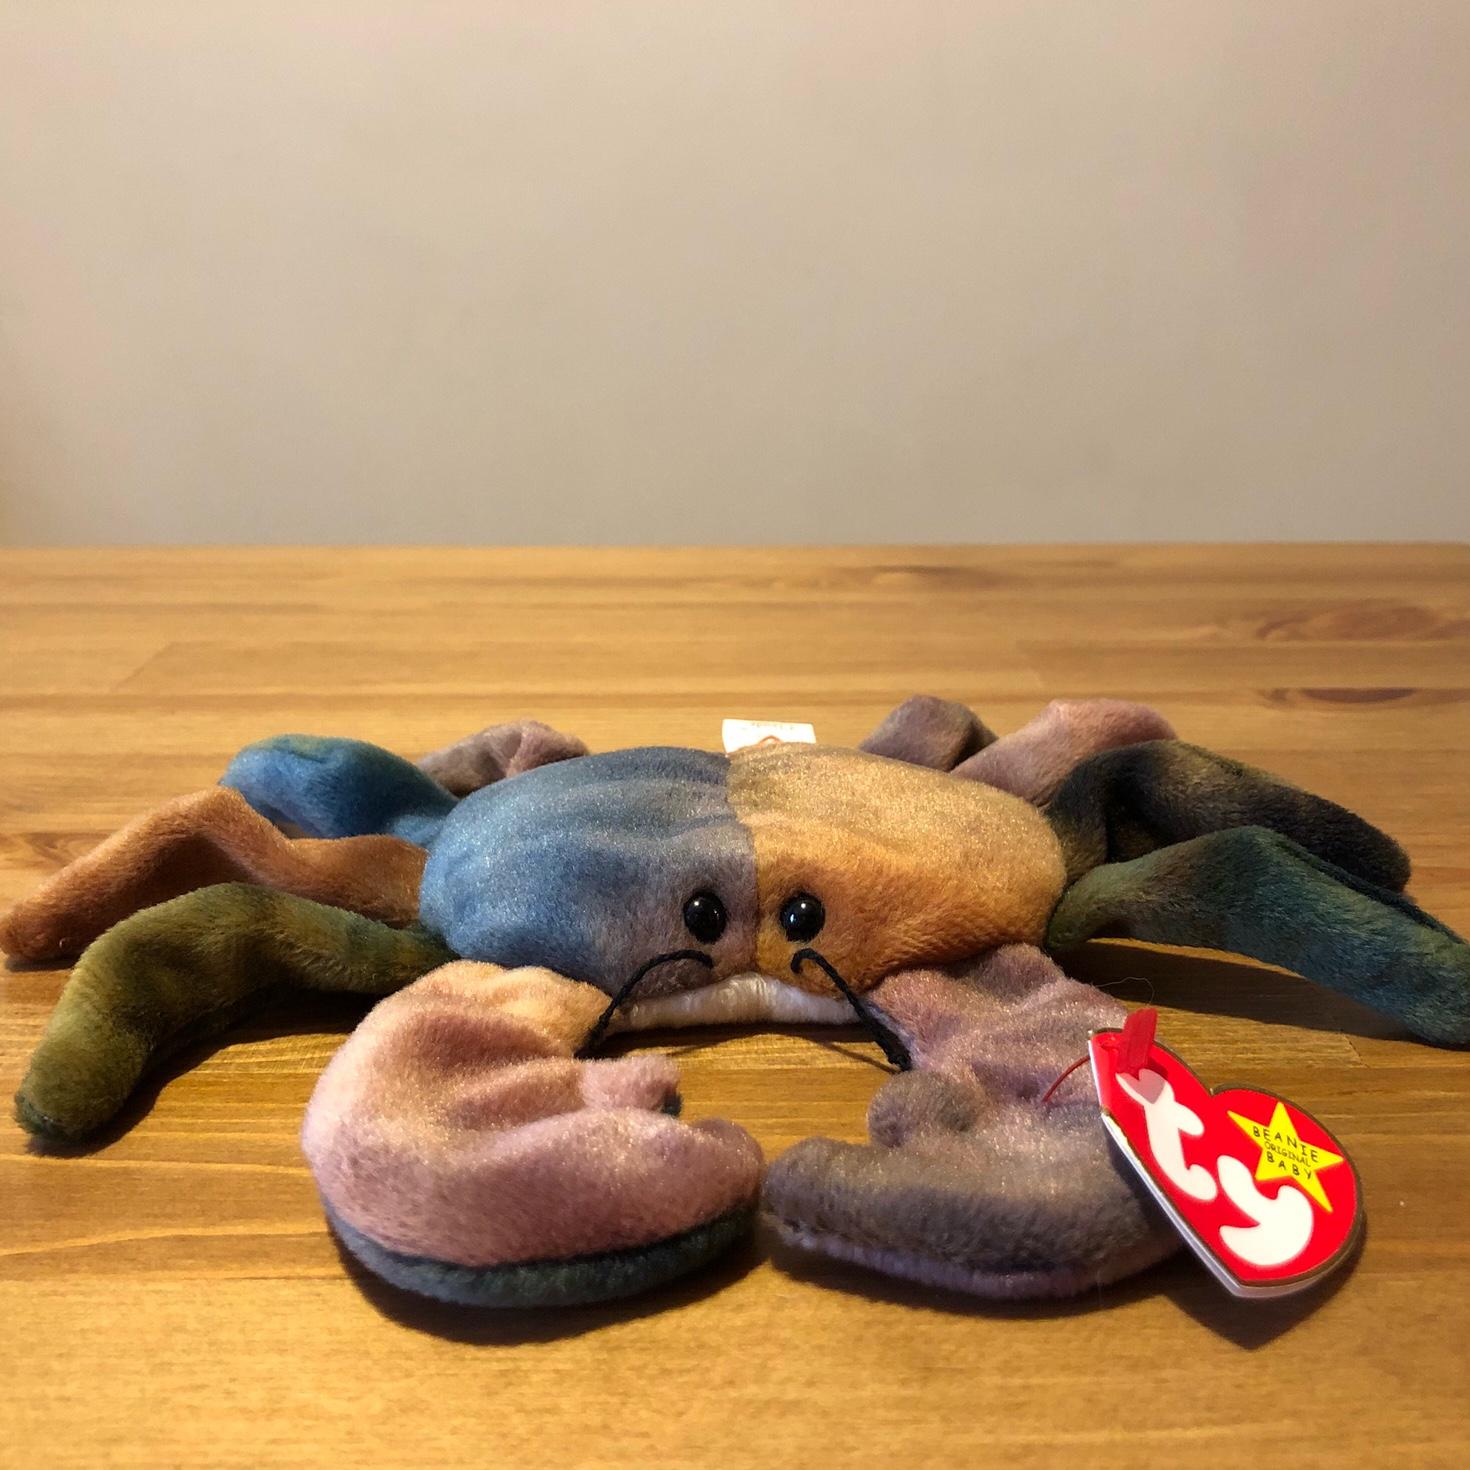 Claude the Crab Beanie Baby with 5th generation hang tag and 6th generation tush tag